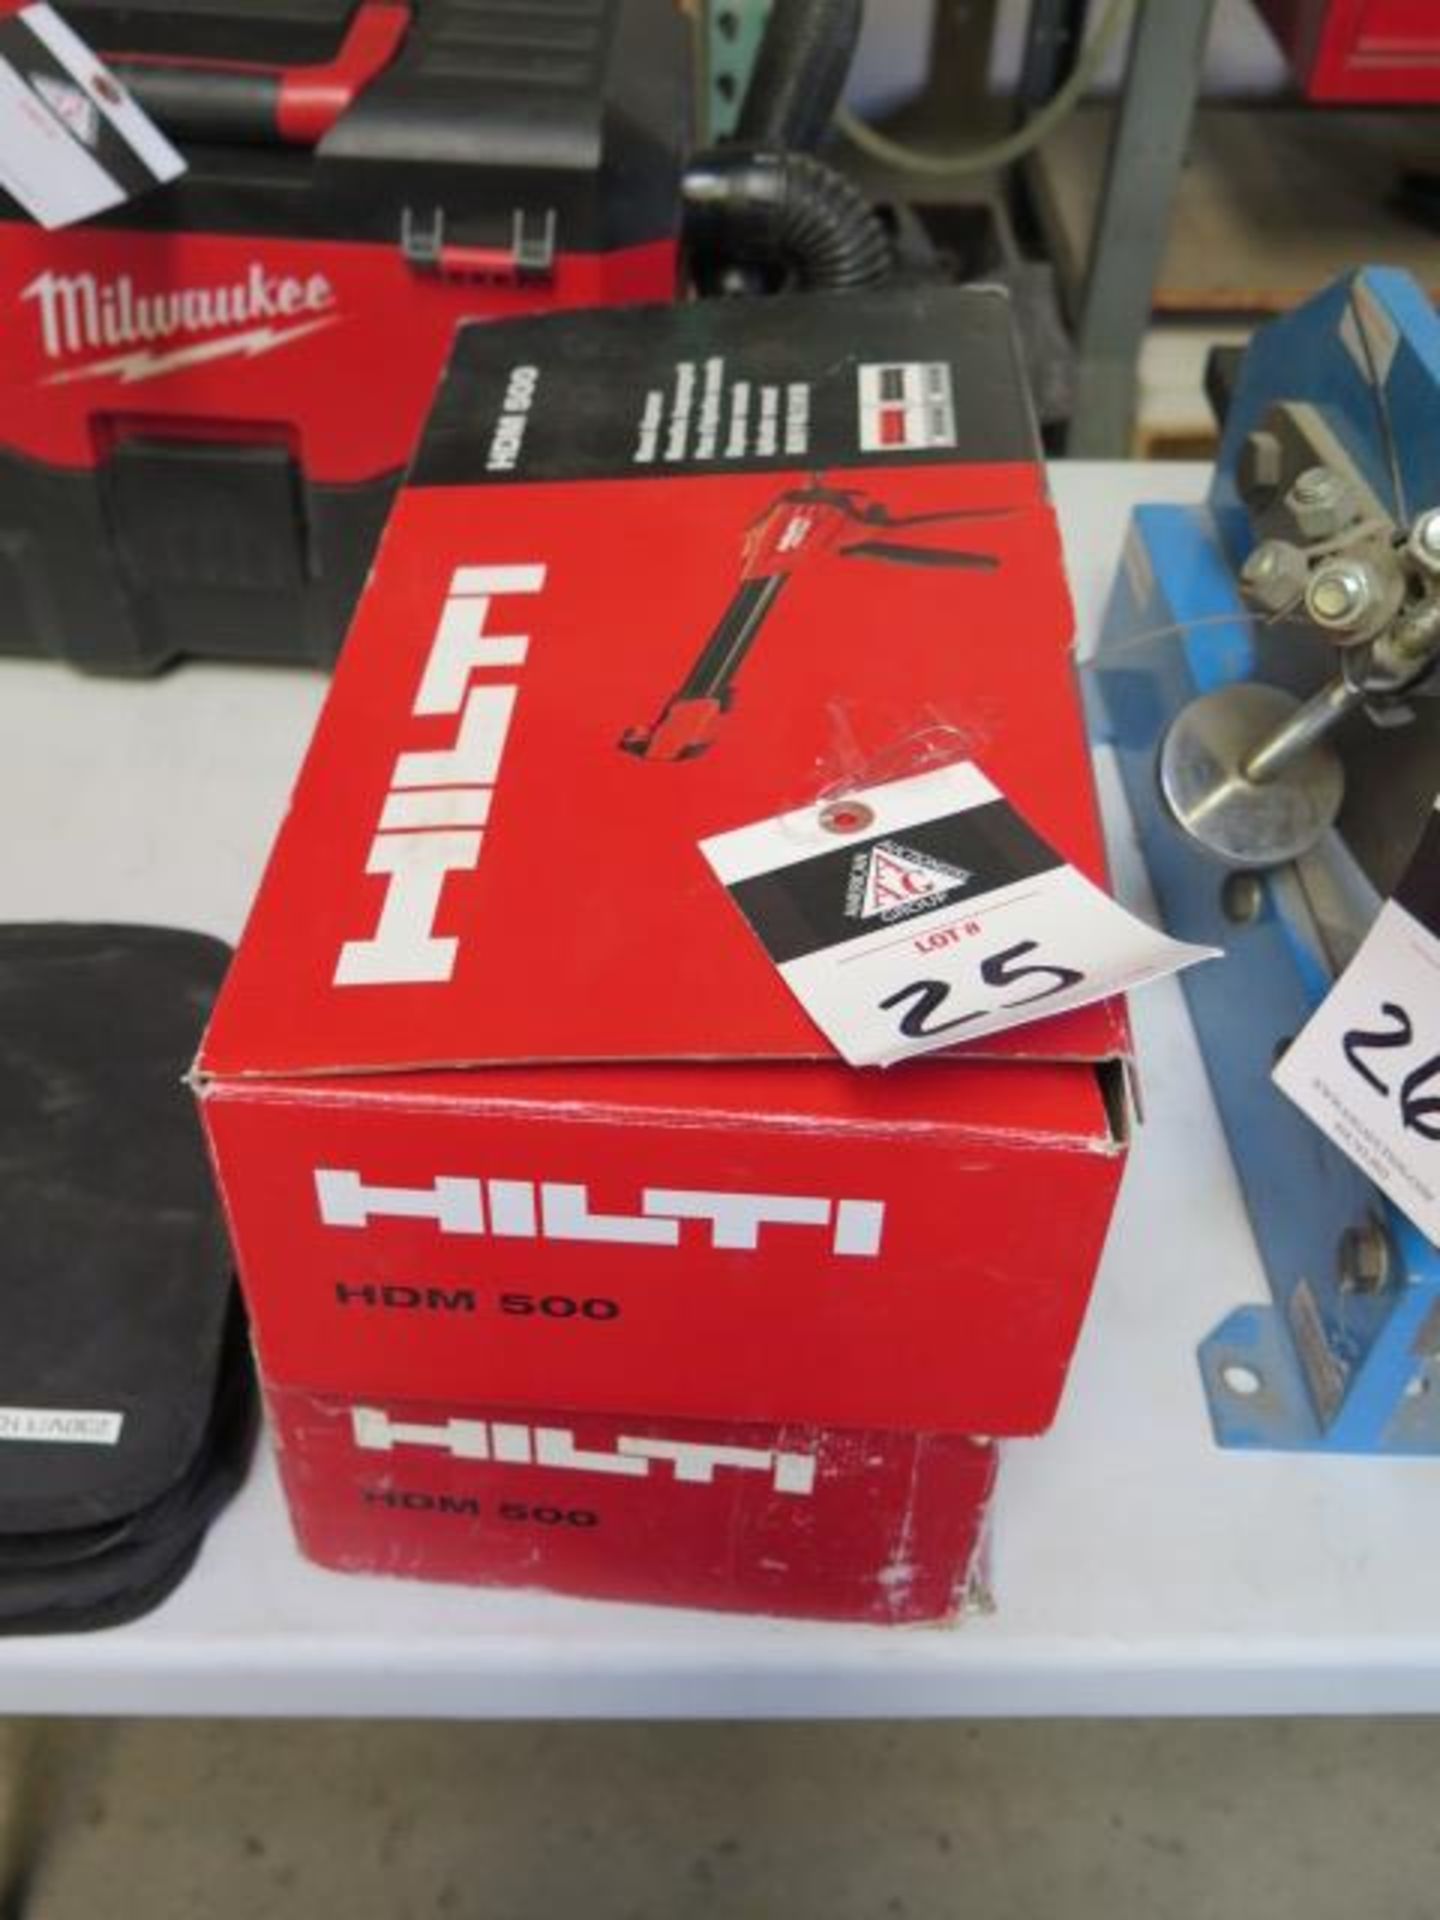 Hilti HDM 500 Manual 2-Part Dispensers (2) (One is NEW - One is used) (SOLD AS-IS - NO WARRANTY)